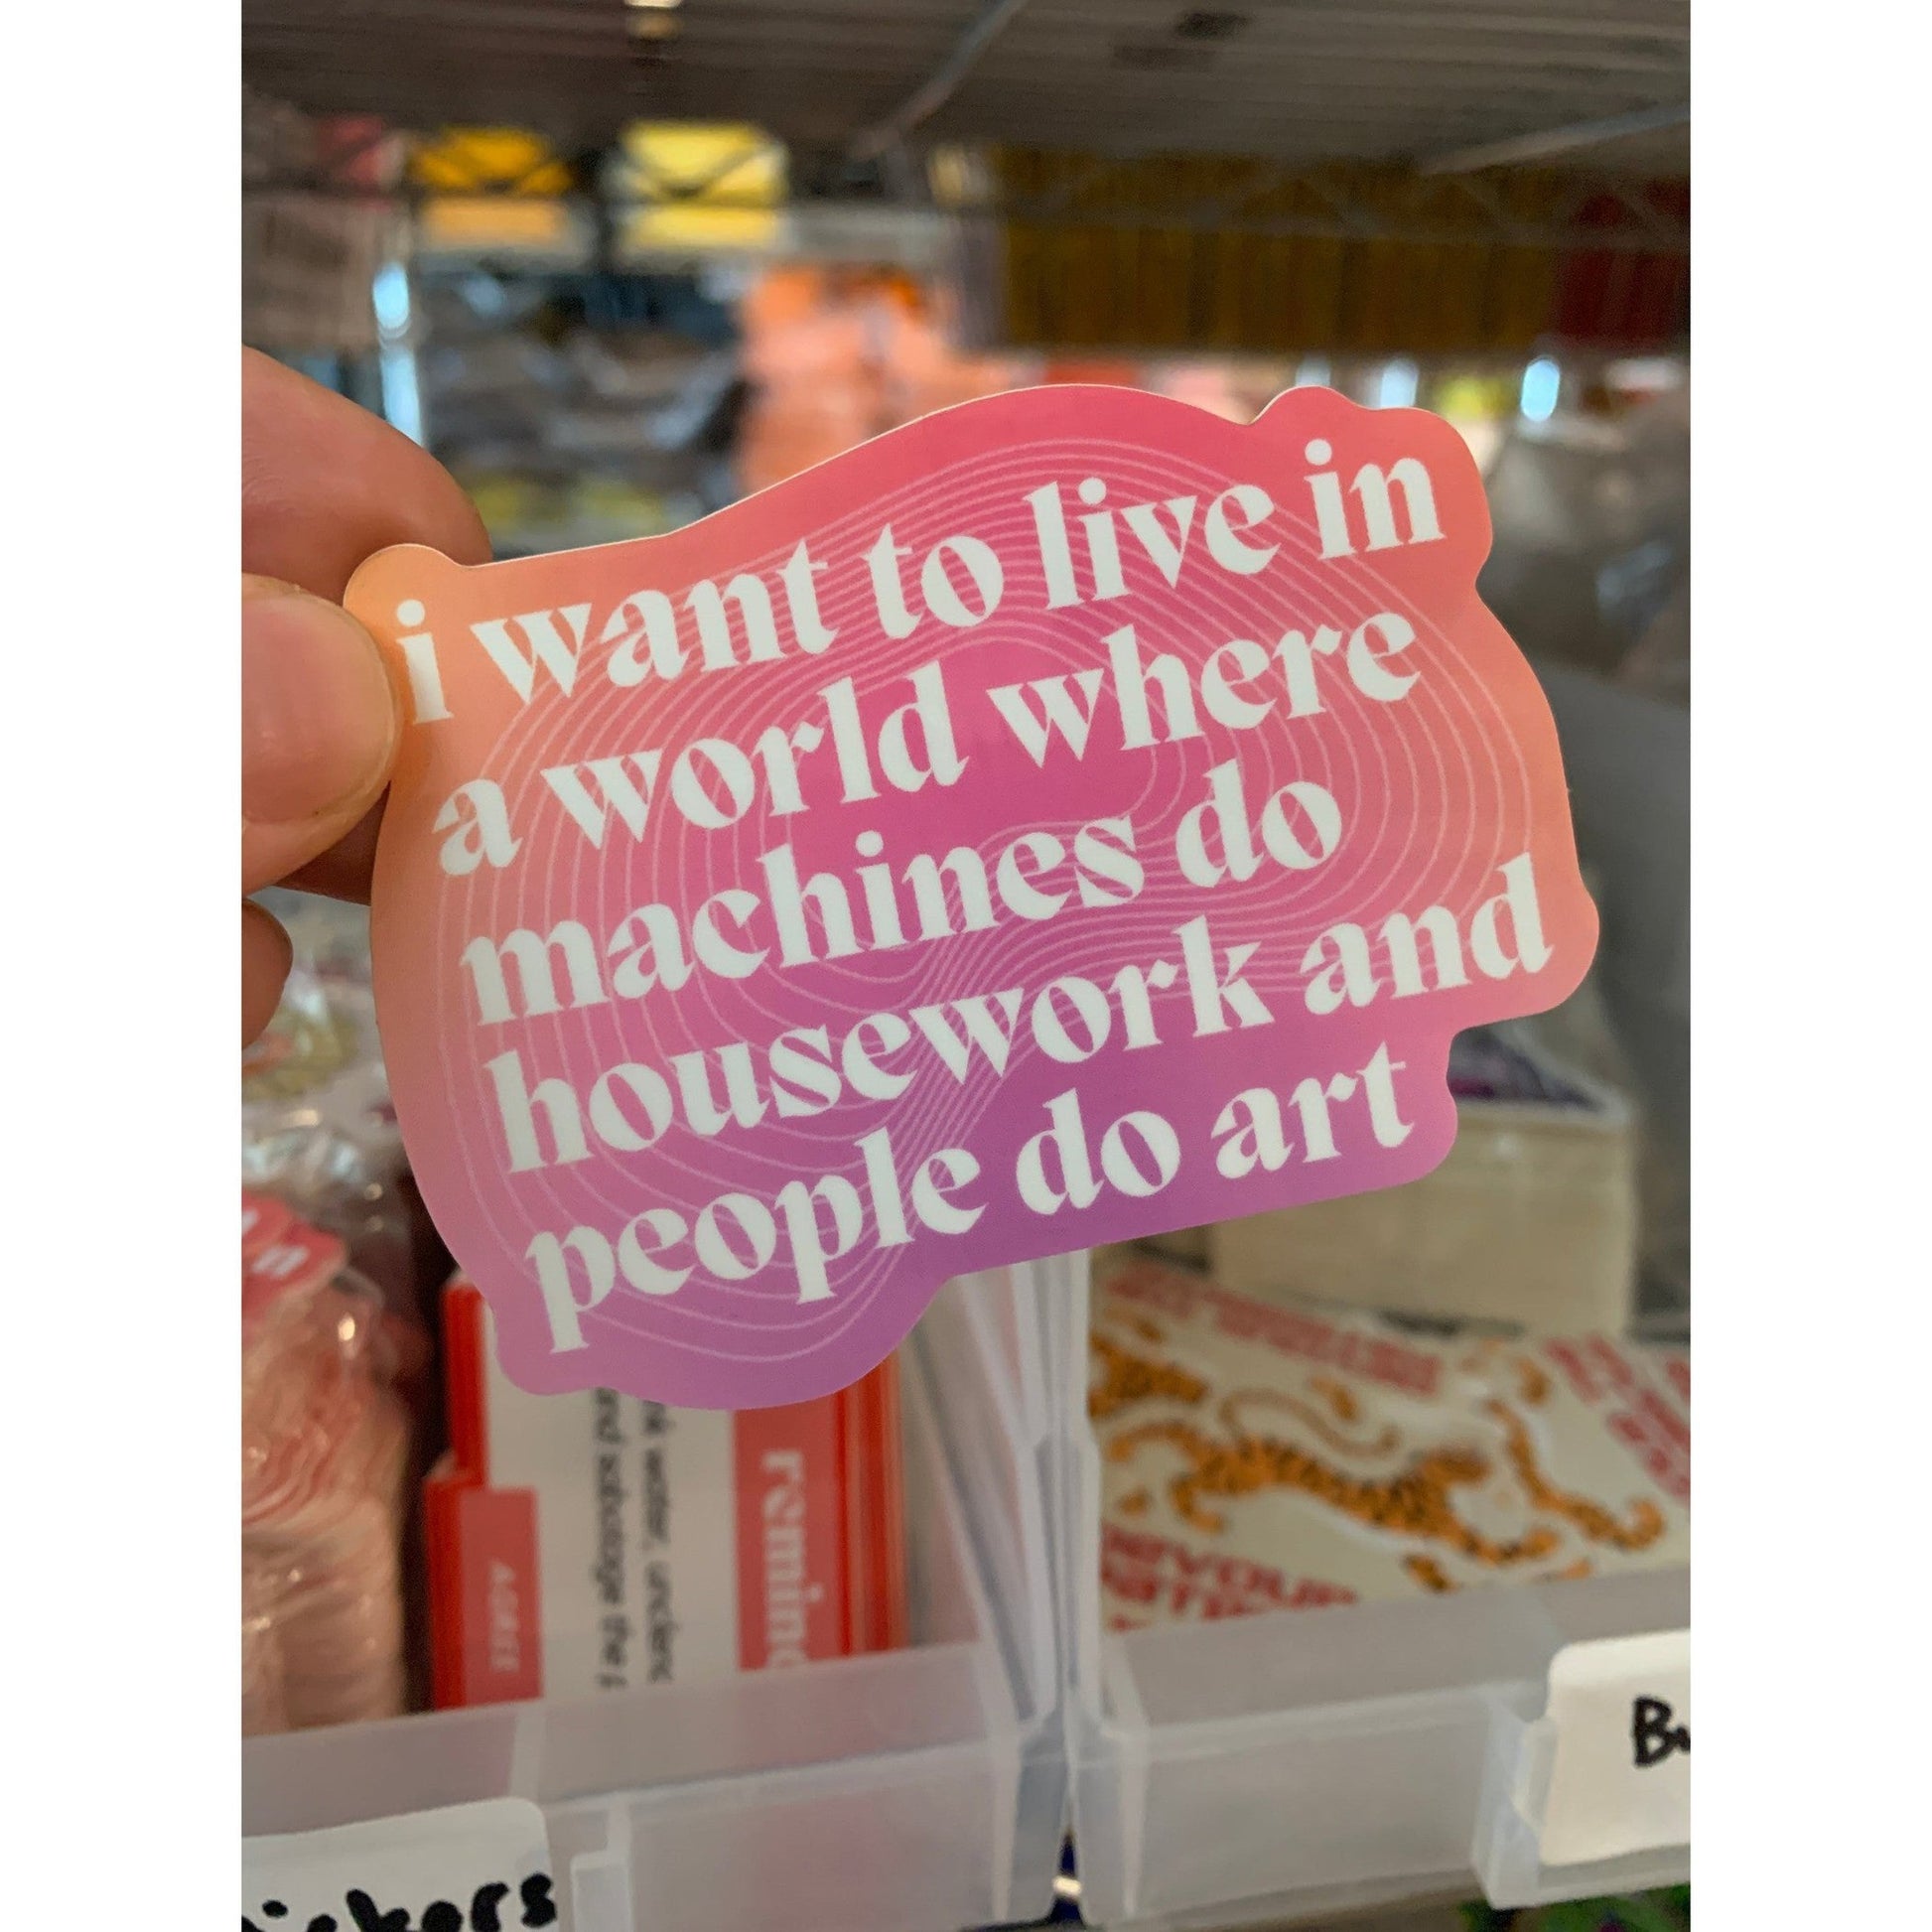 I Want to Live in a World Where Machines Do Housework Glossy Die Cut Vinyl Sticker 3in x 2.33in